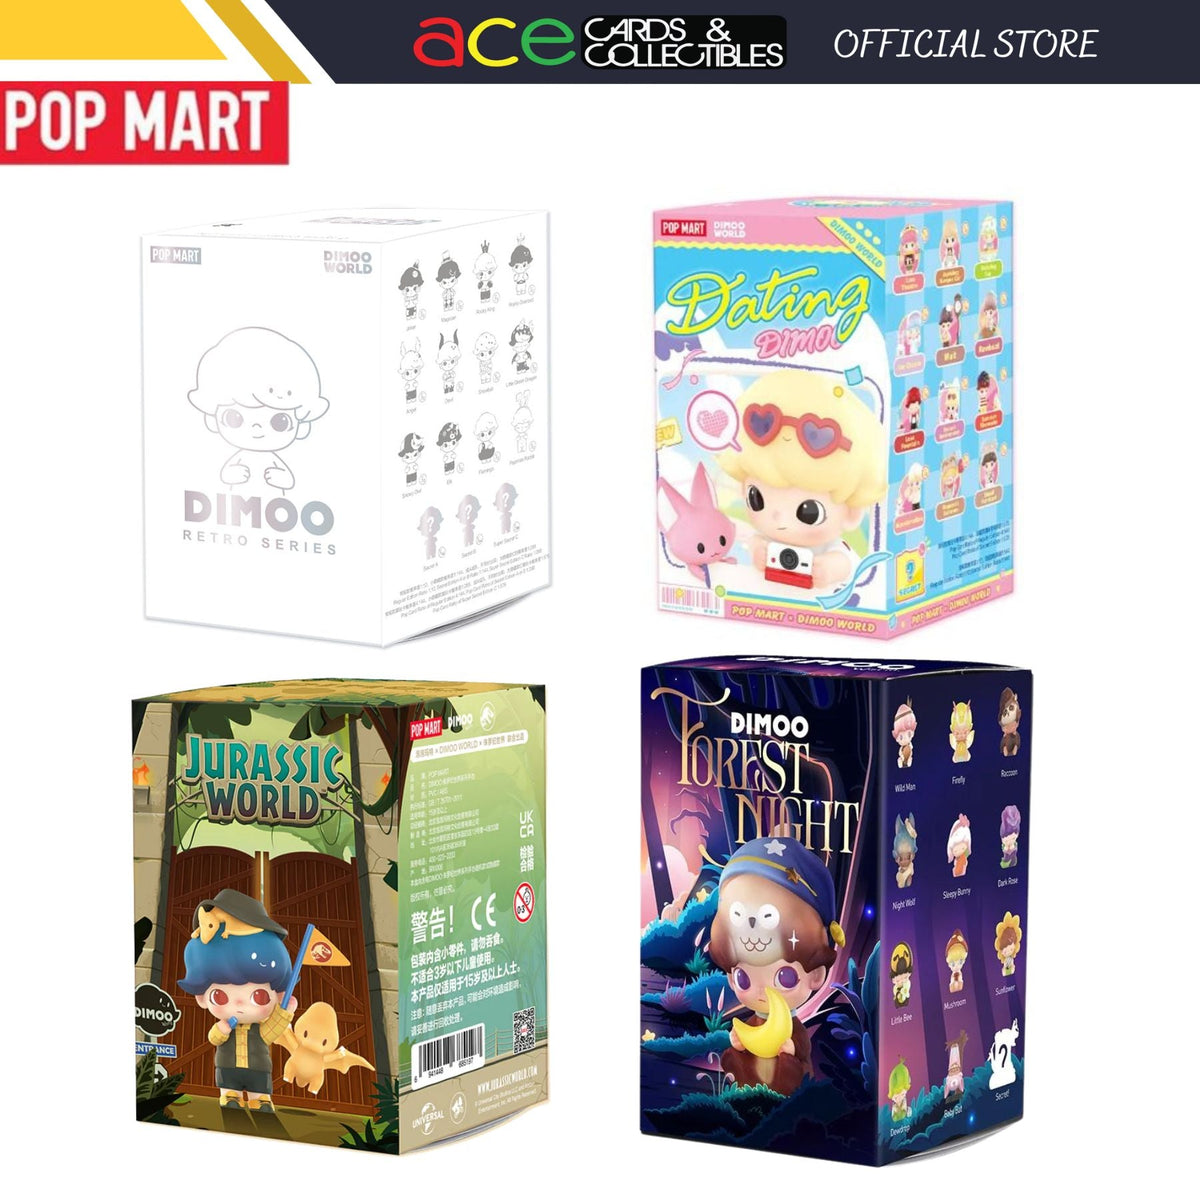 POP MART Dimoo Series-Forest Night-Pop Mart-Ace Cards &amp; Collectibles